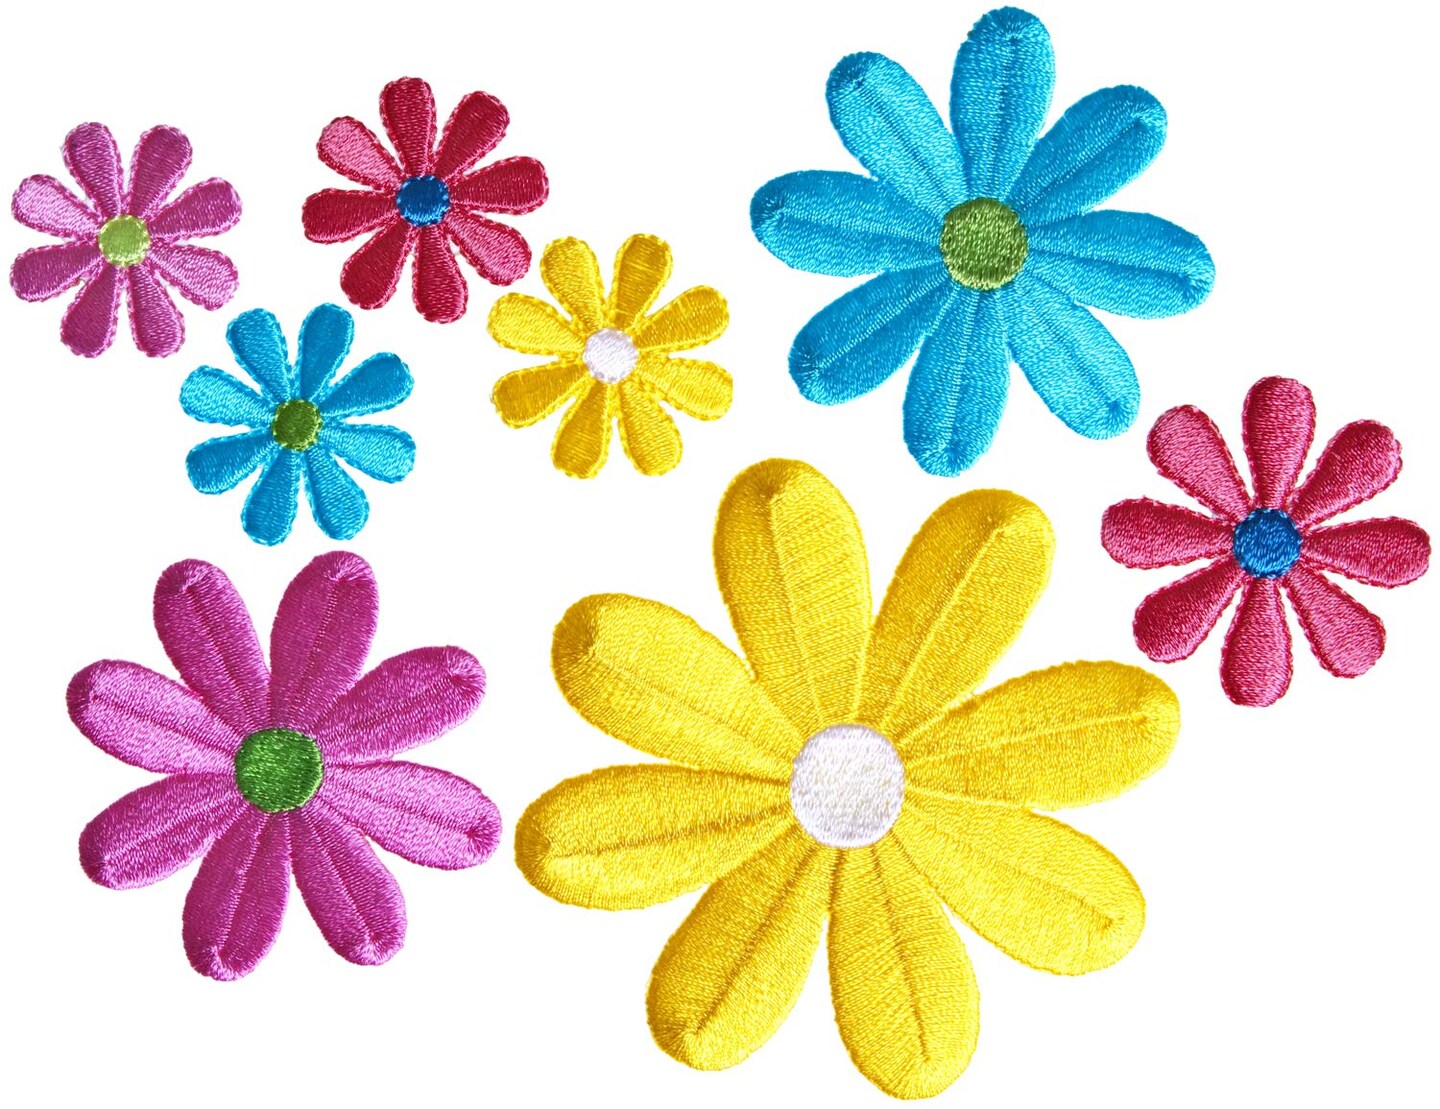 Simplicity Multicolor Daisy Flowers Applique Clothing Iron On Patches, 8pc, Sizes Vary